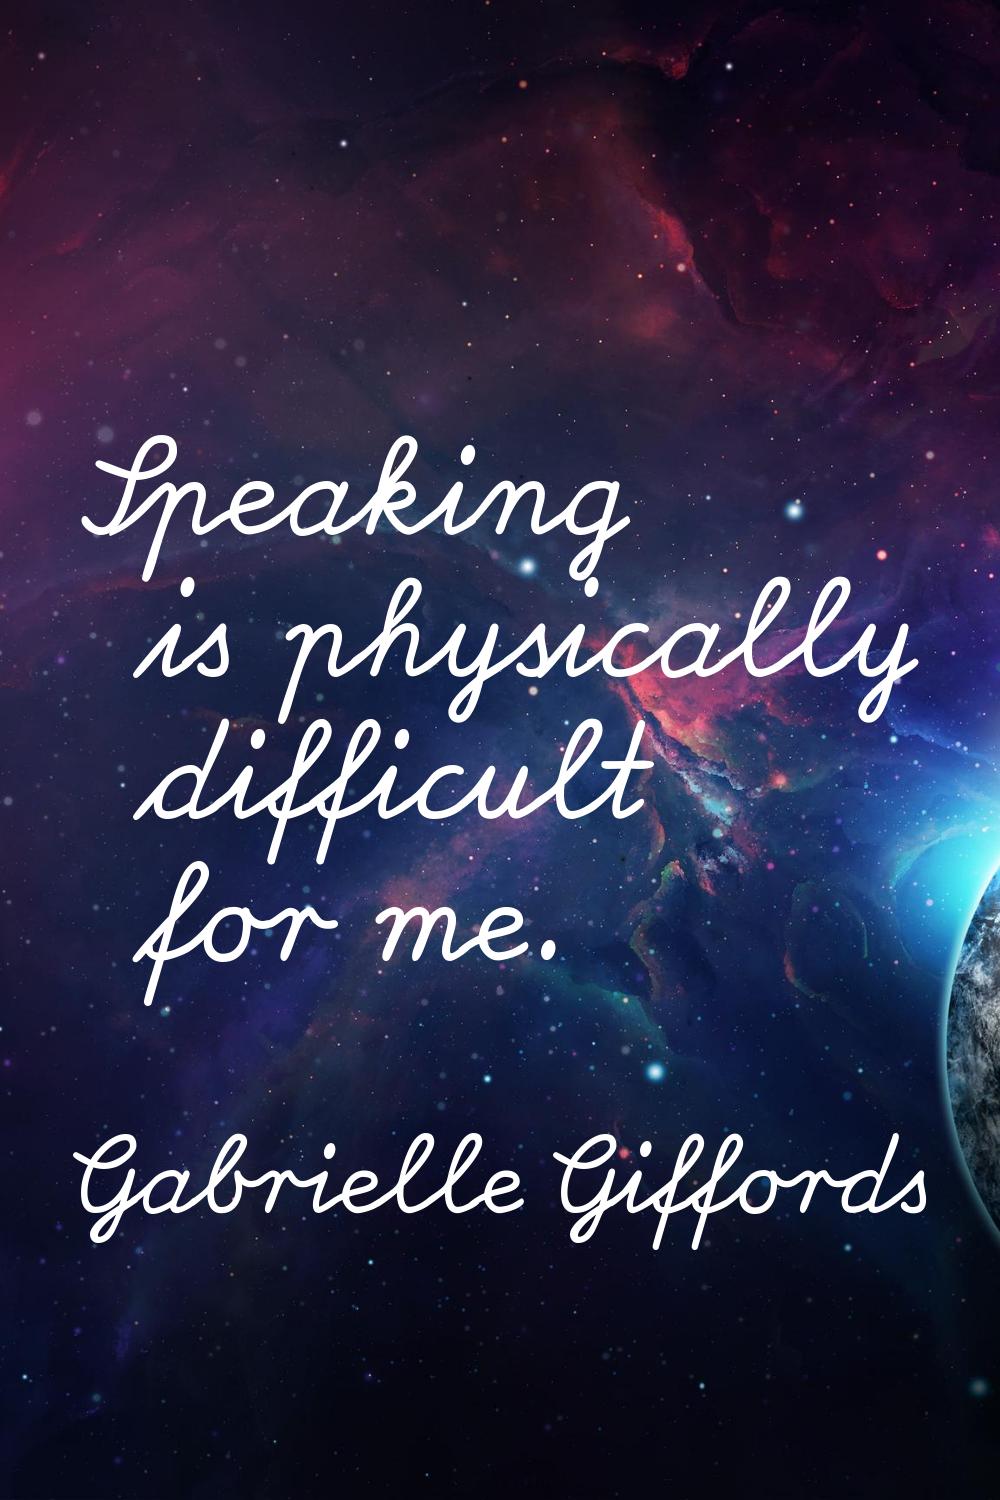 Speaking is physically difficult for me.